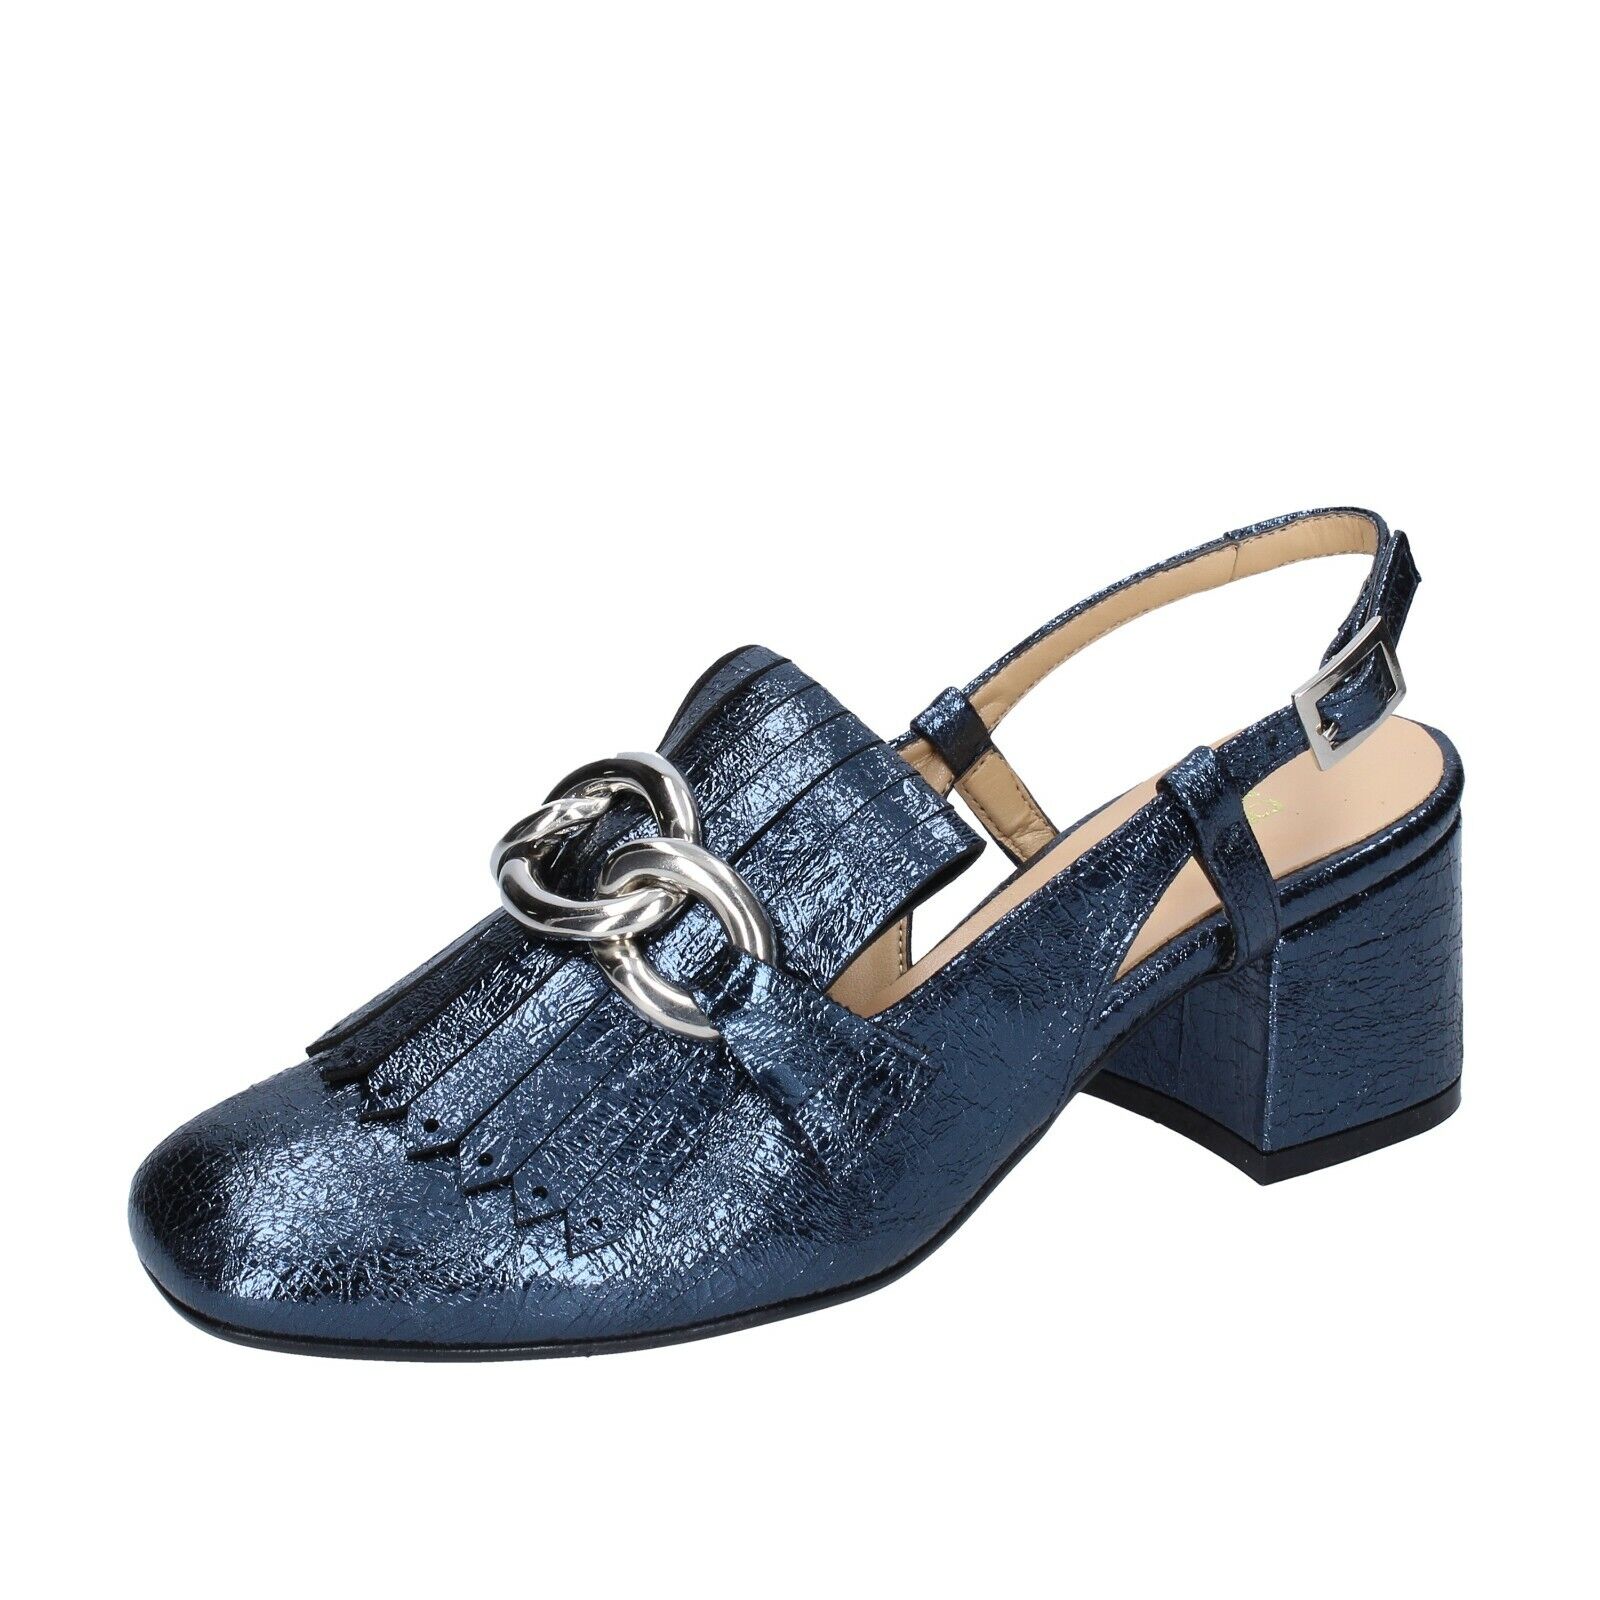 Womenapos;s Shoes OLGA RUBINI 36 Leather BP Sales for sale Eu Court Blue 5 ☆ very popular